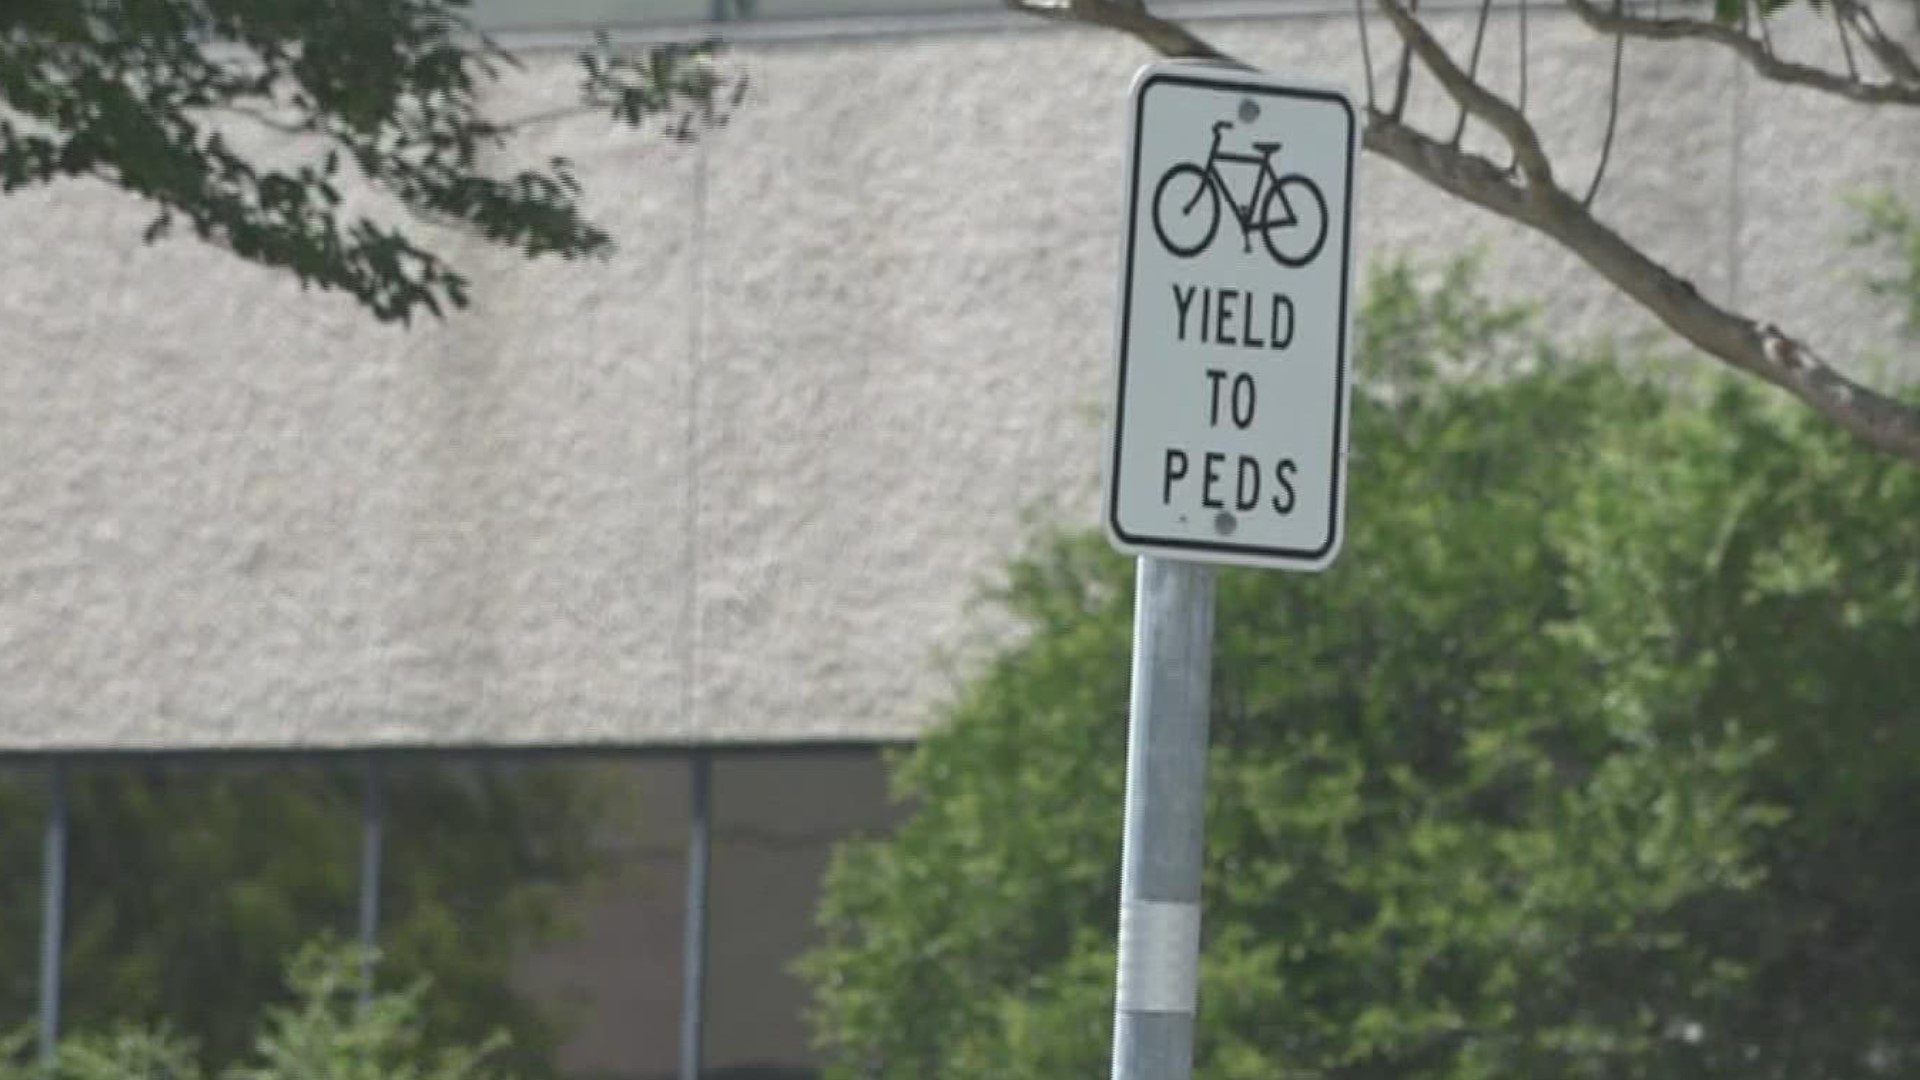 A petition with more than 600 signatures calls for safer bike lanes across the city.